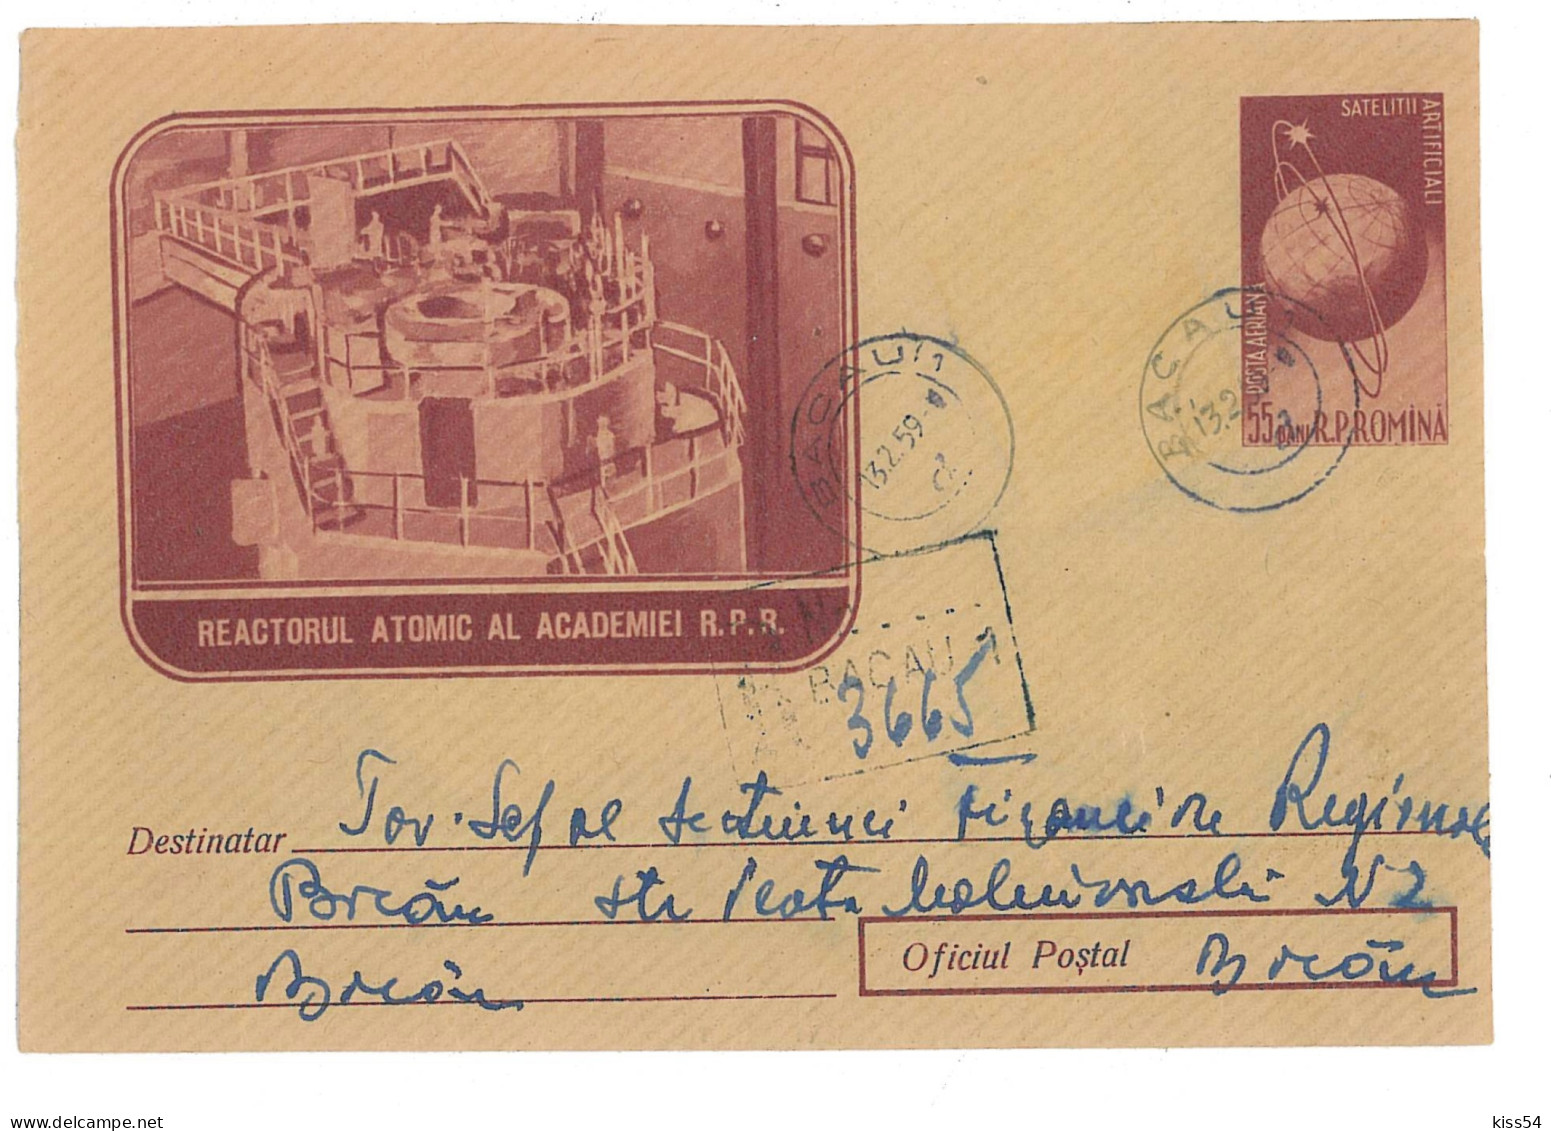 IP 58 A - 0119a-a ENERGY, Atomic Reactor, Romania - REGISTERED Stationery - Used - 1958 - Atome